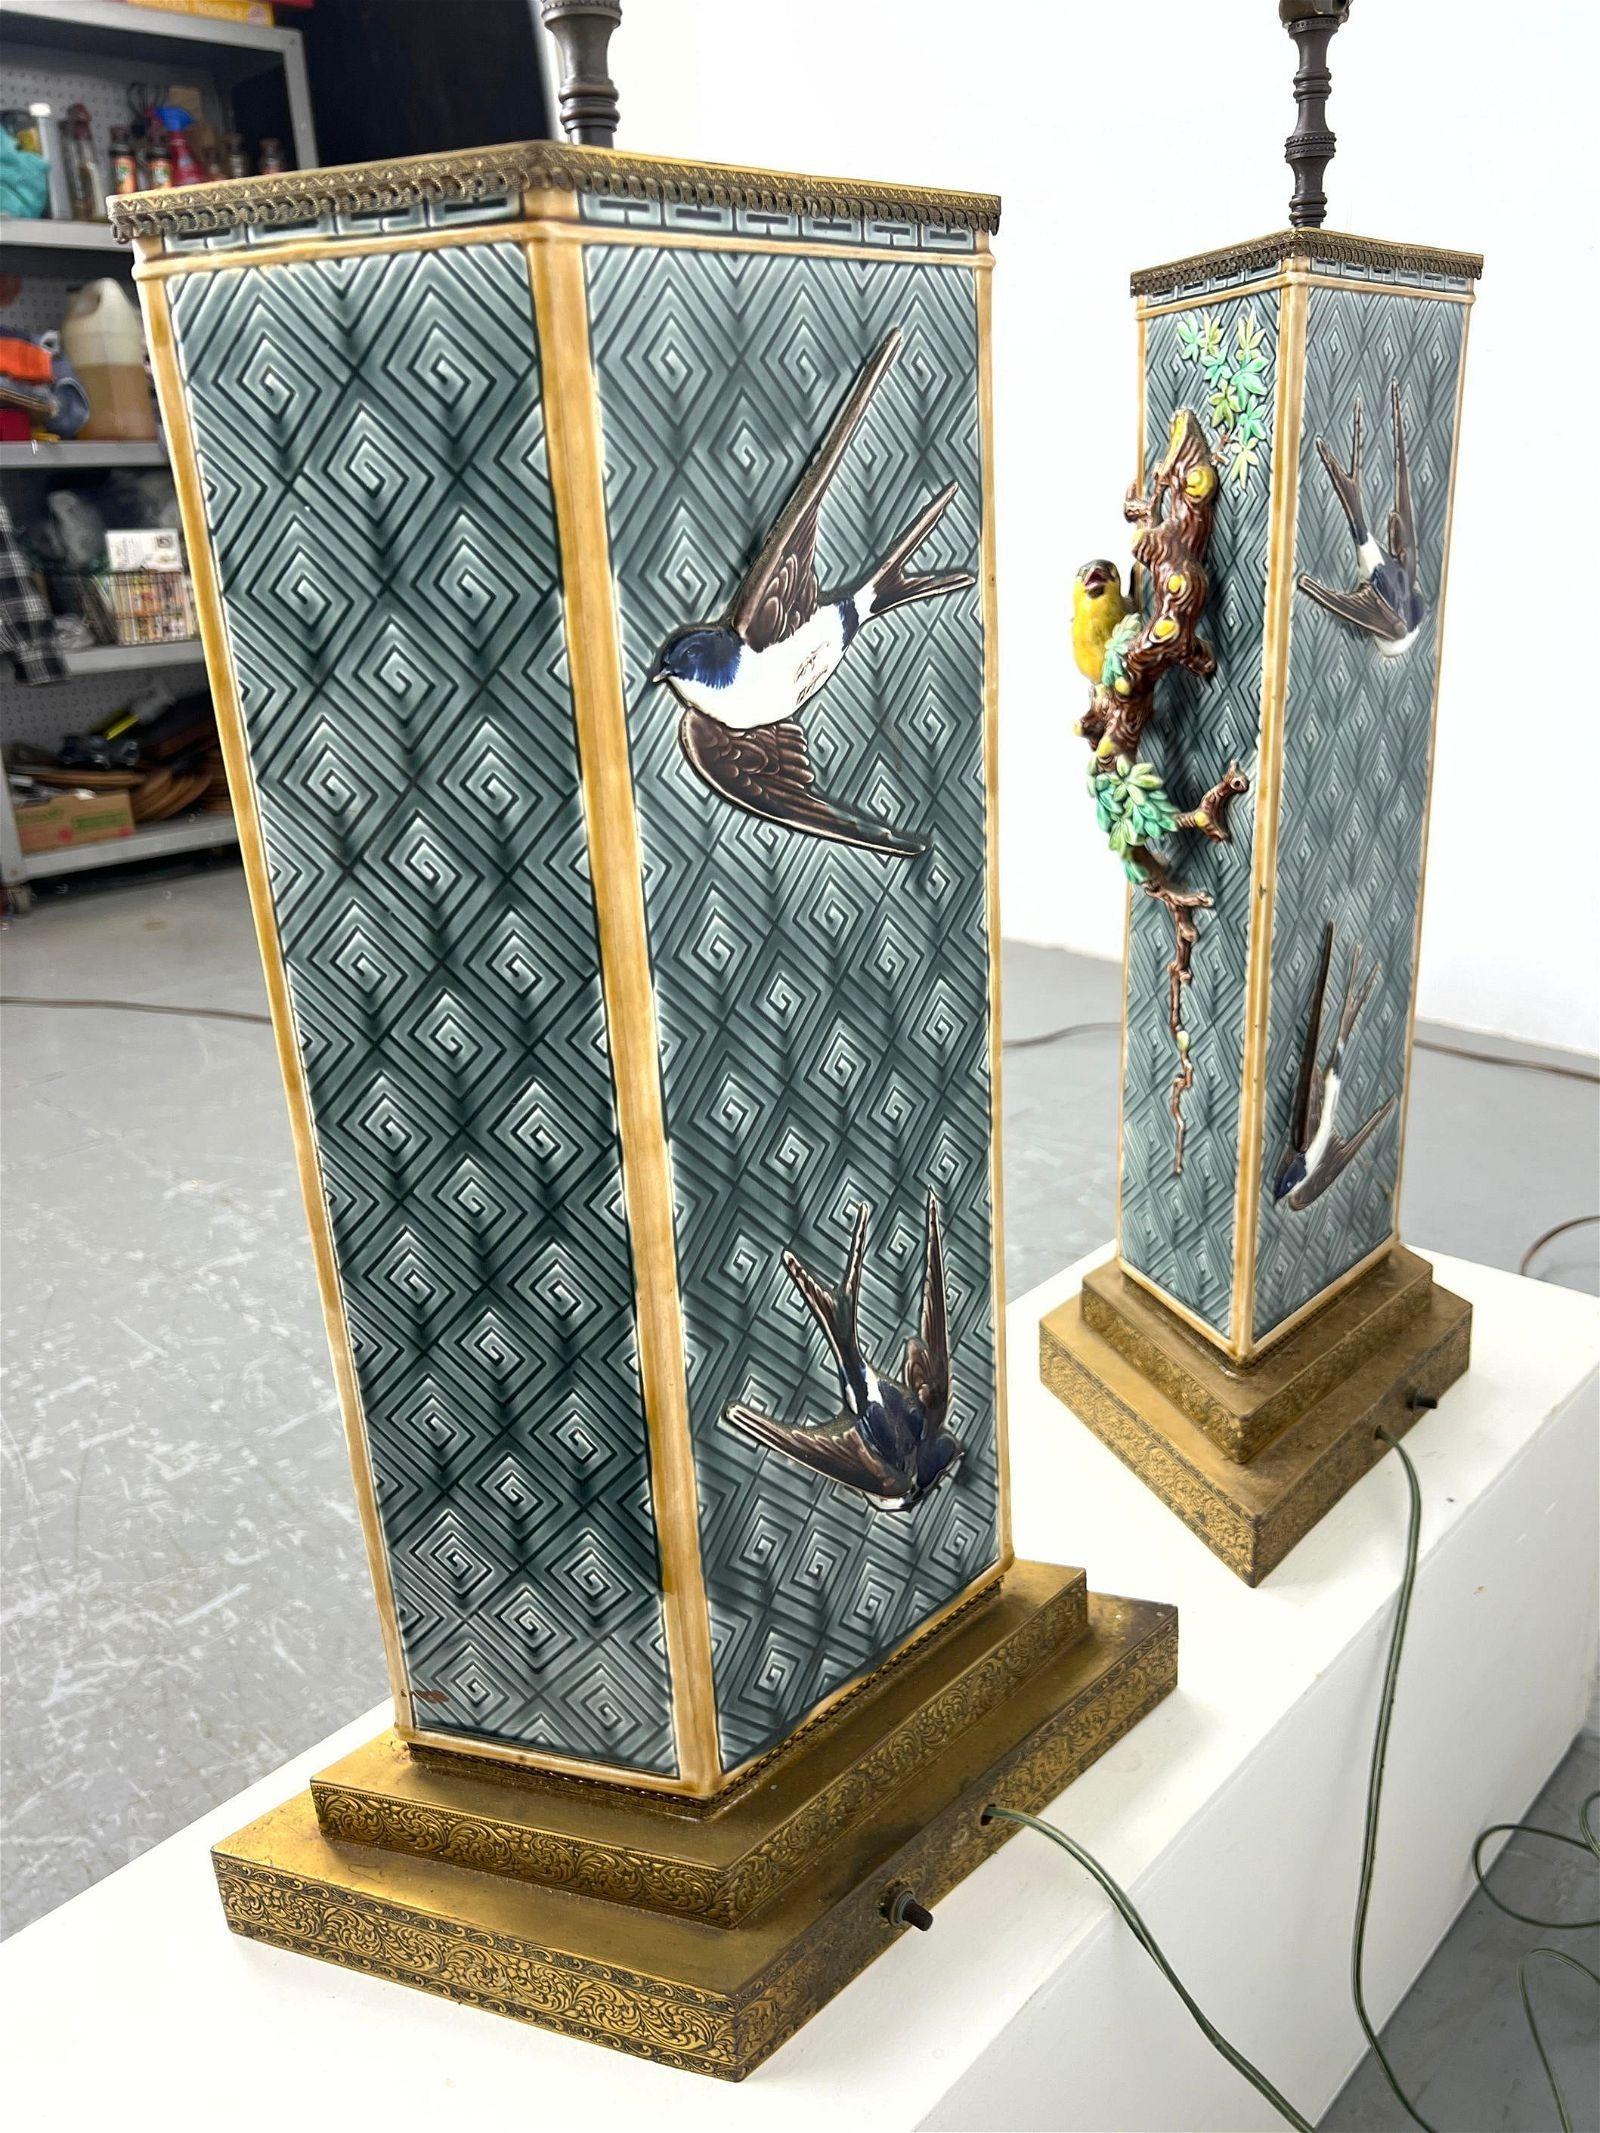 Pair of unique antique (early 20th century) polychrome glazed earthenware (faience) vases mounted on brass pedestals for use as table lamps, featuring 
song birds in relief on a lattice ground with various Asian motifs.  Possibly from Sarreguemines.